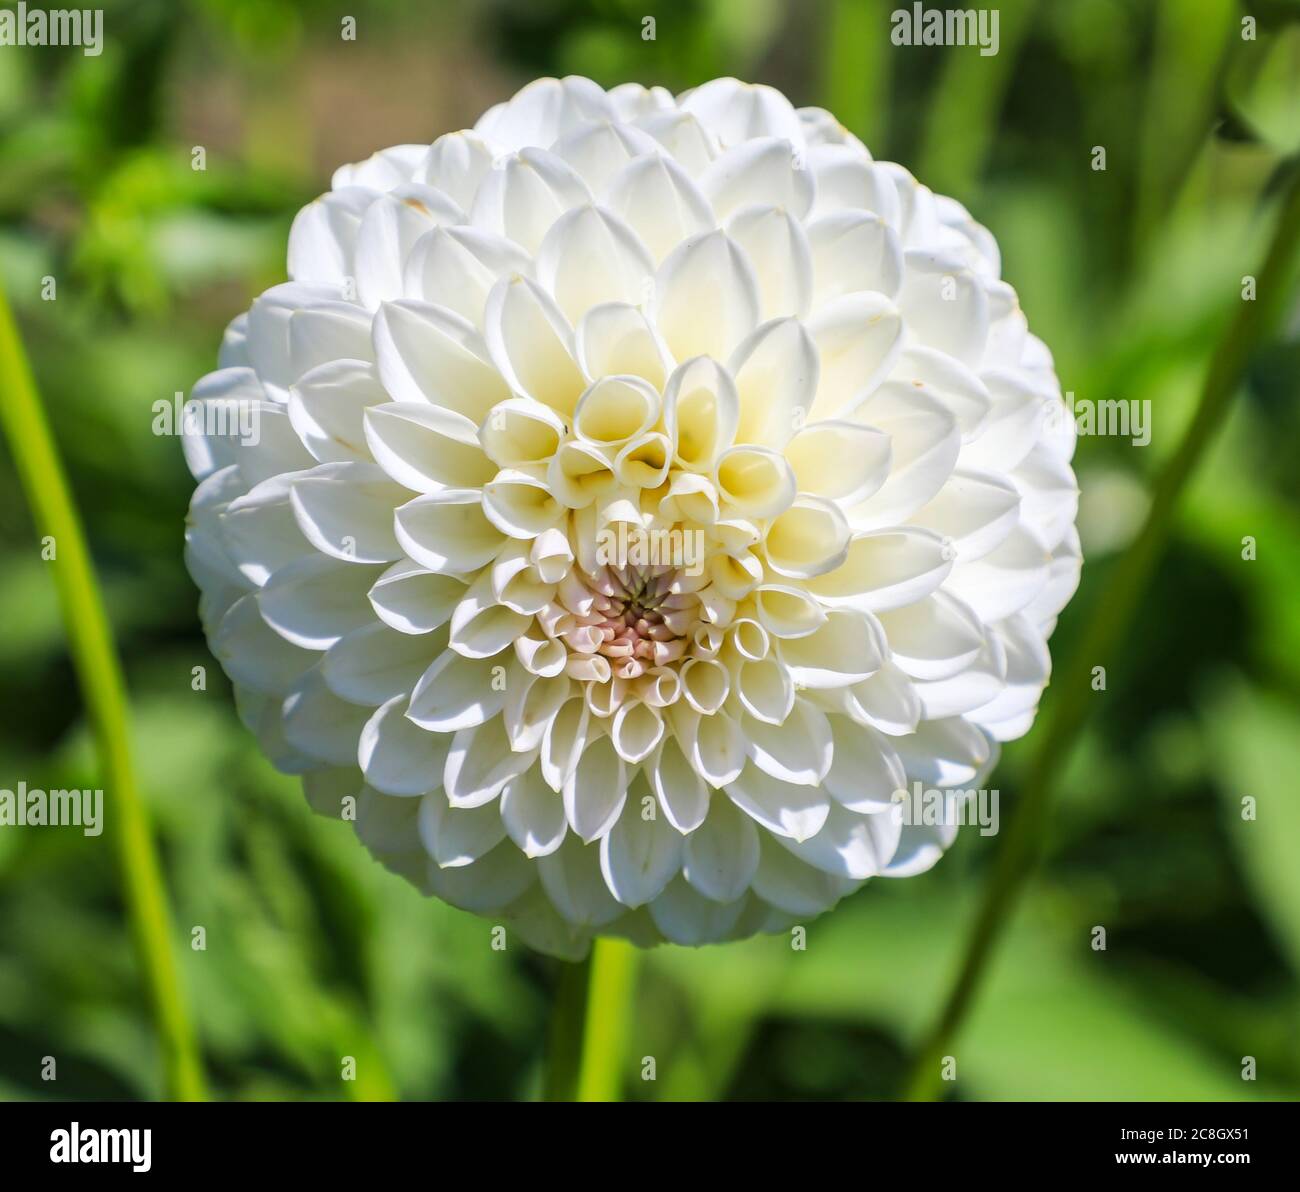 Close up shot of a white flower head of a Dahlia 'Catherine Ireland' at the National Dahlia Collection, Penzance, Cornwall, England Stock Photo